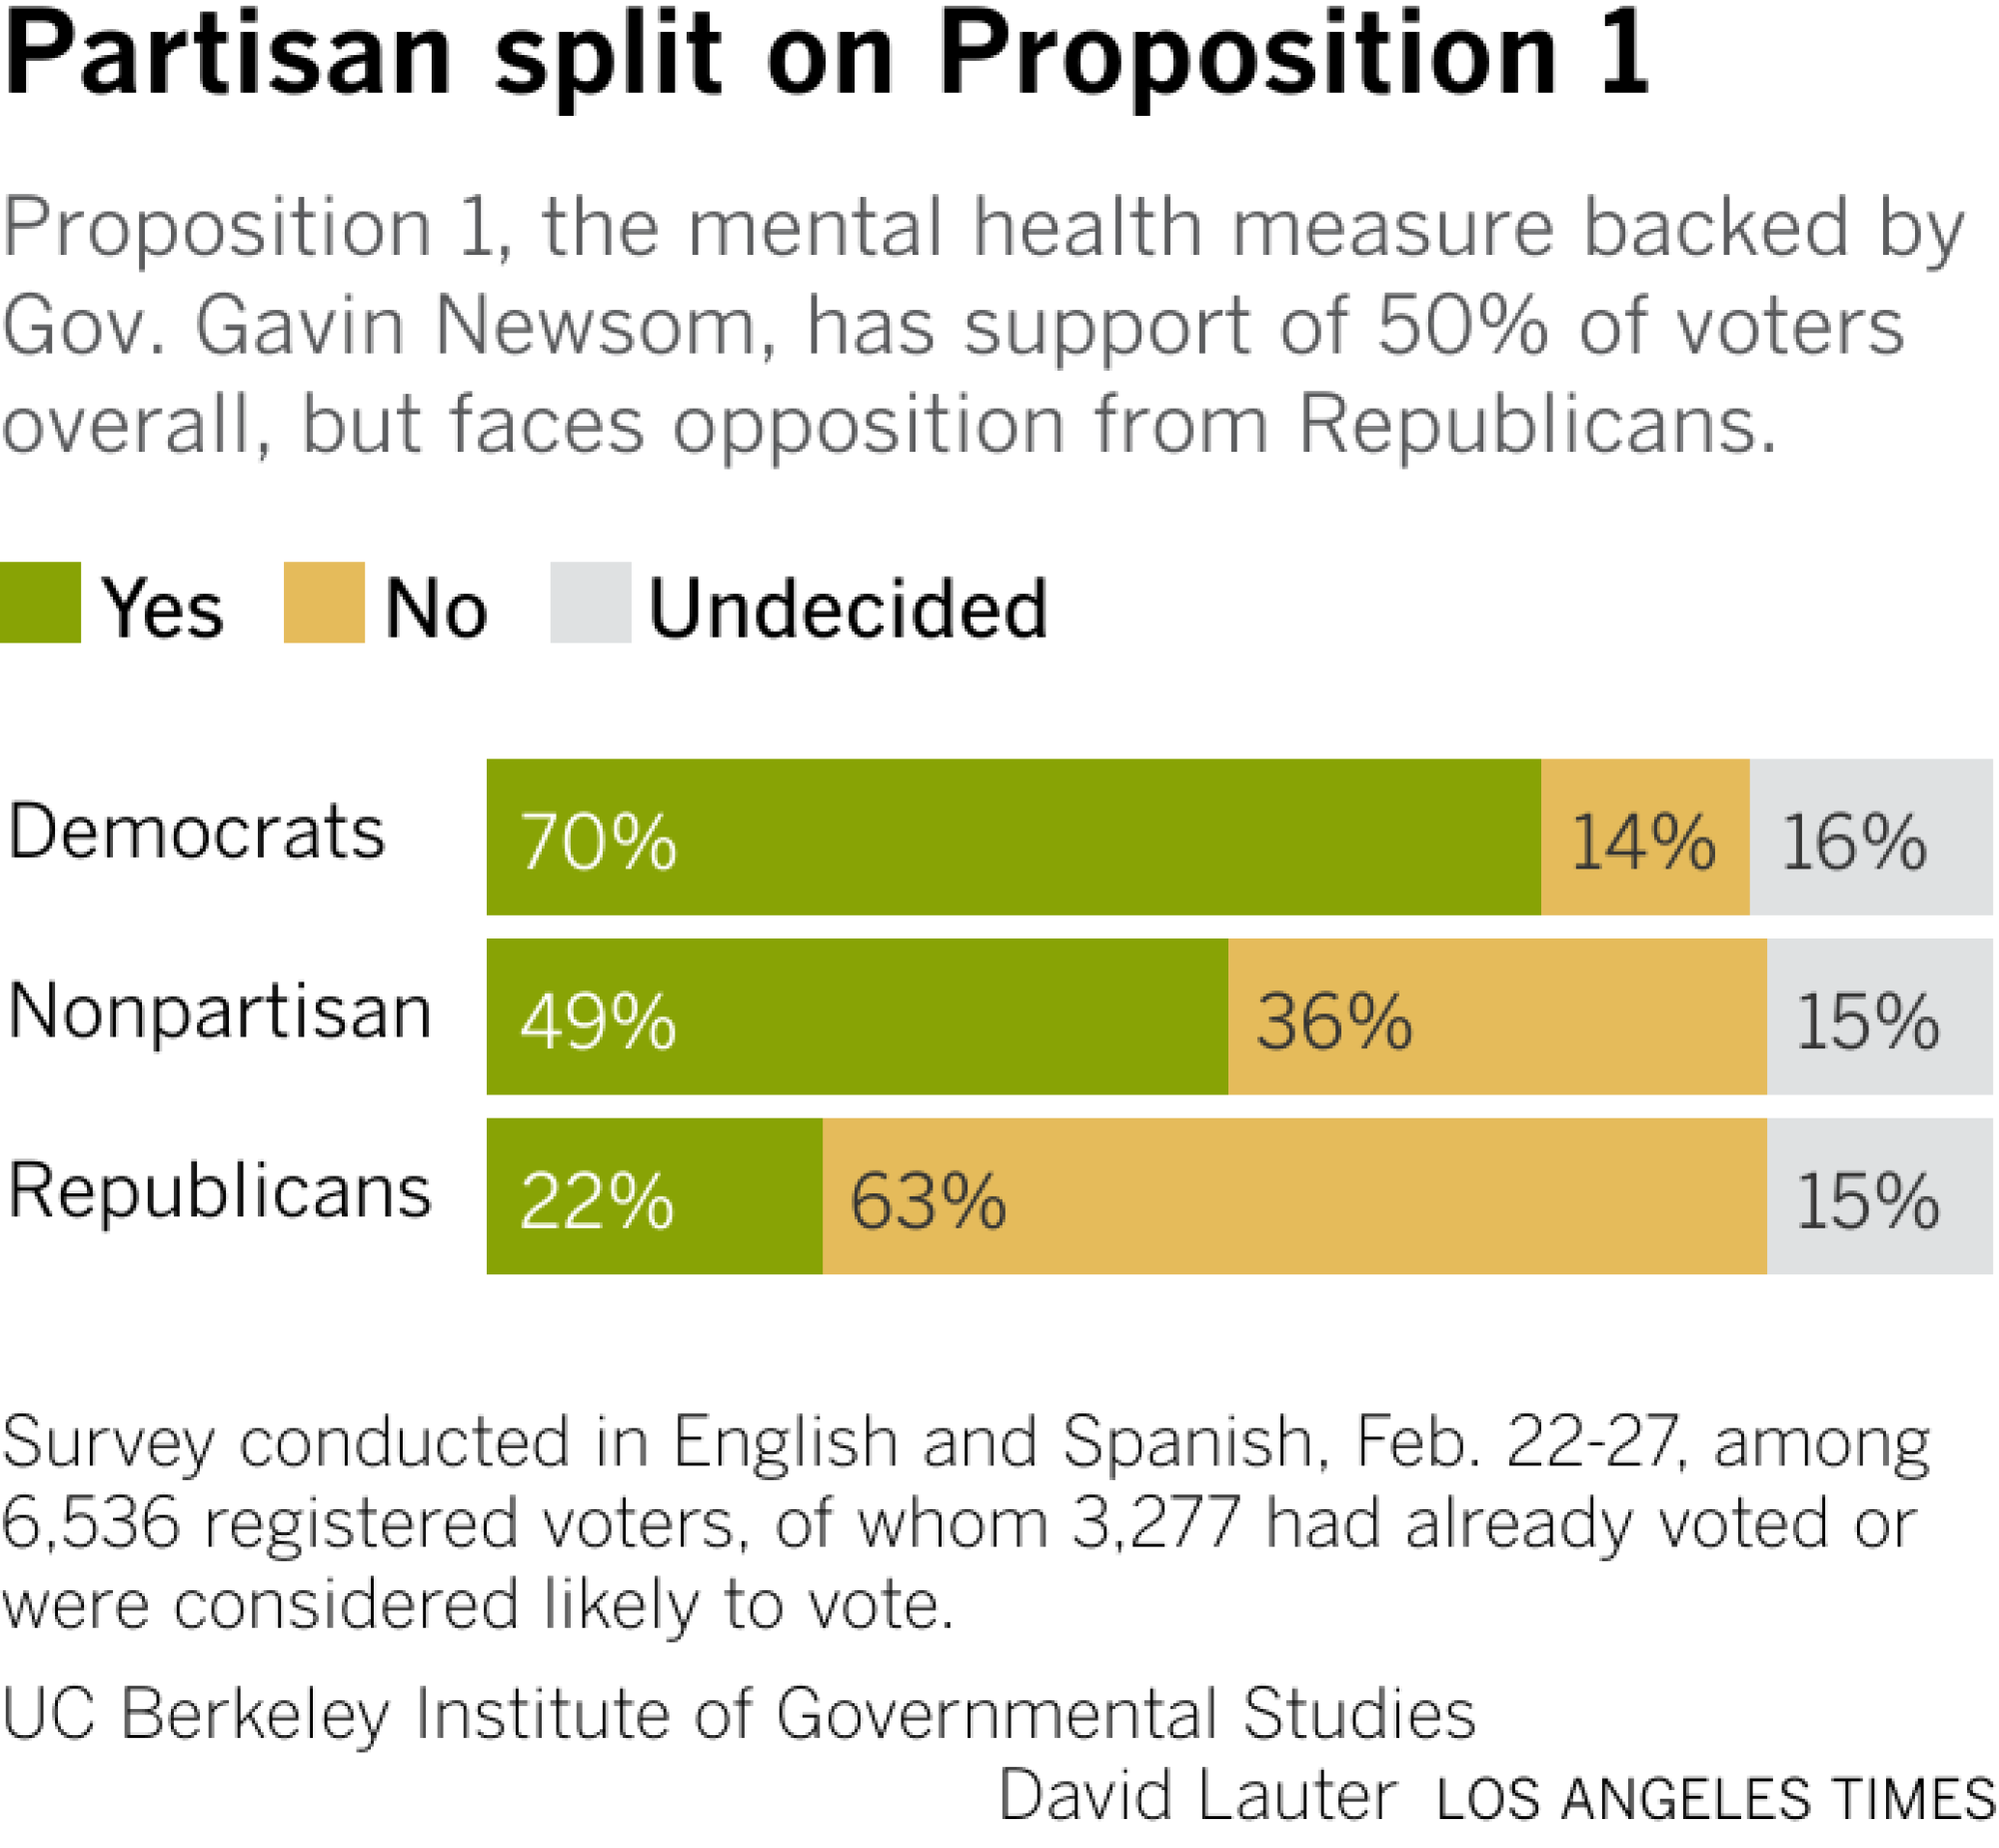 The bars show the proportion of Democrats, nonpartisan voters and Republicans who support or oppose Proposition 1.